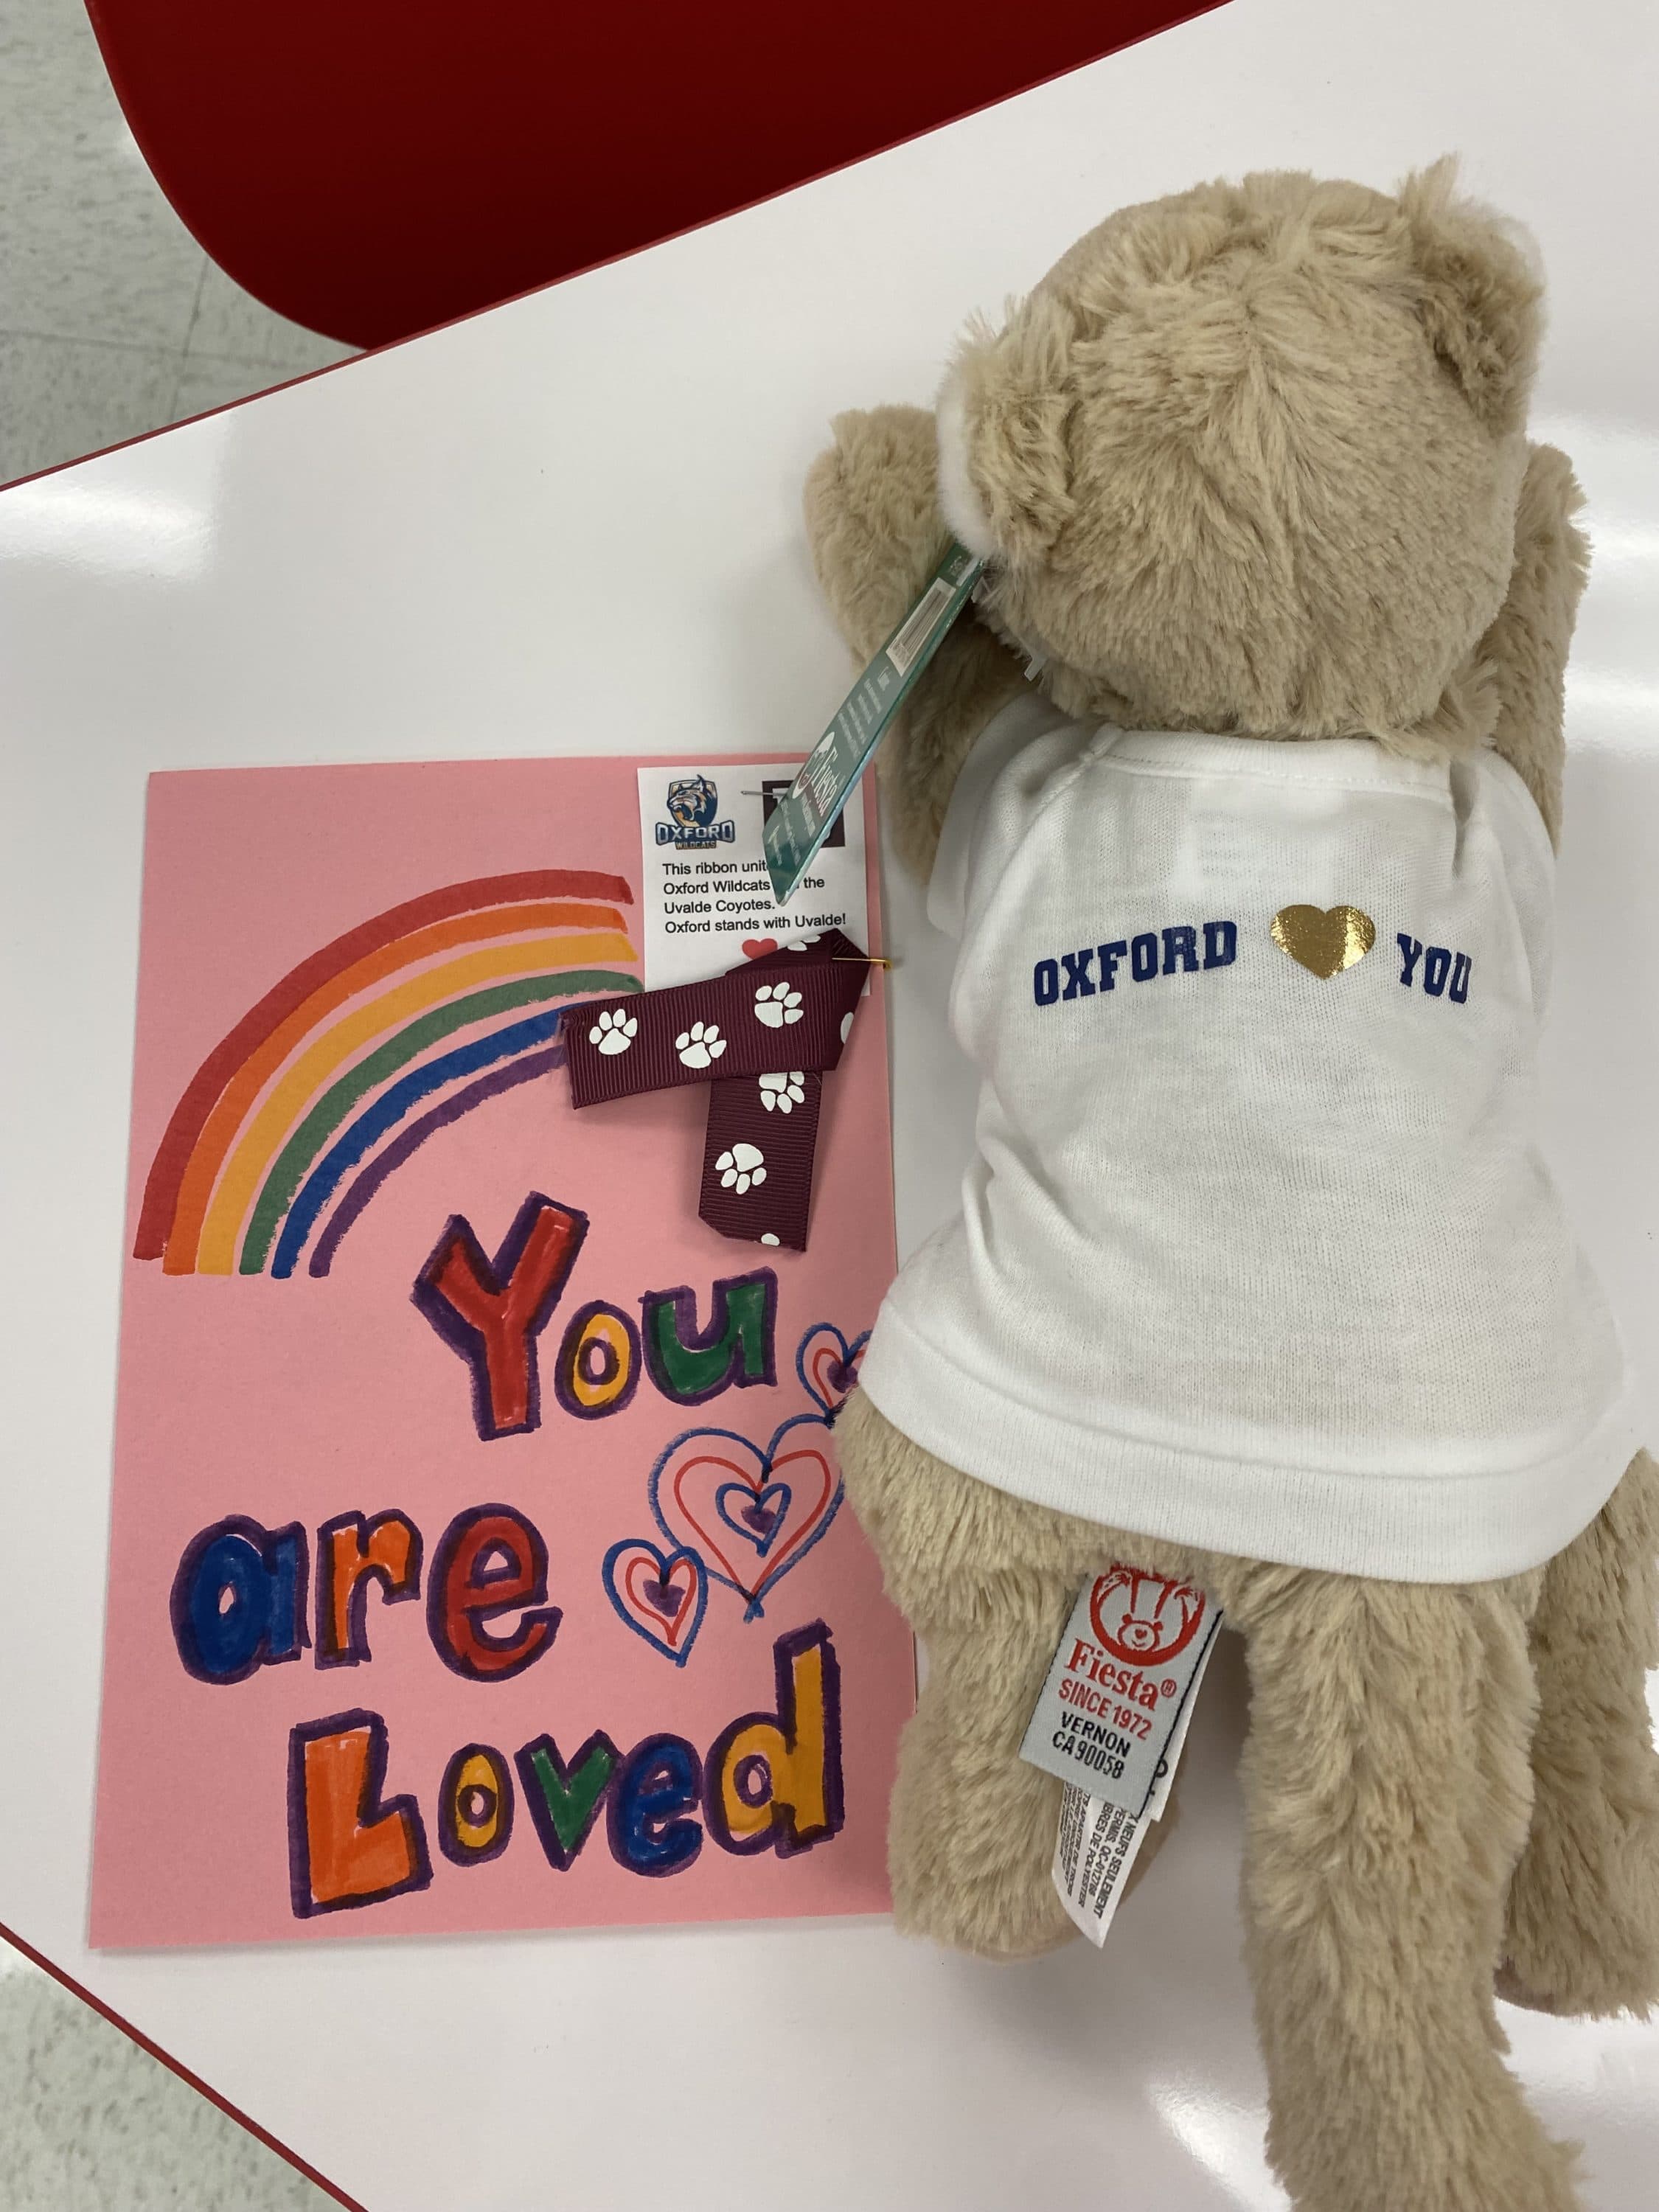 Ella Klimowicz traveled to Uvalde last week with her mother, Carrie Klimowicz, to hand place the stuffed animals and meet with families. (Carrie Klimowicz)